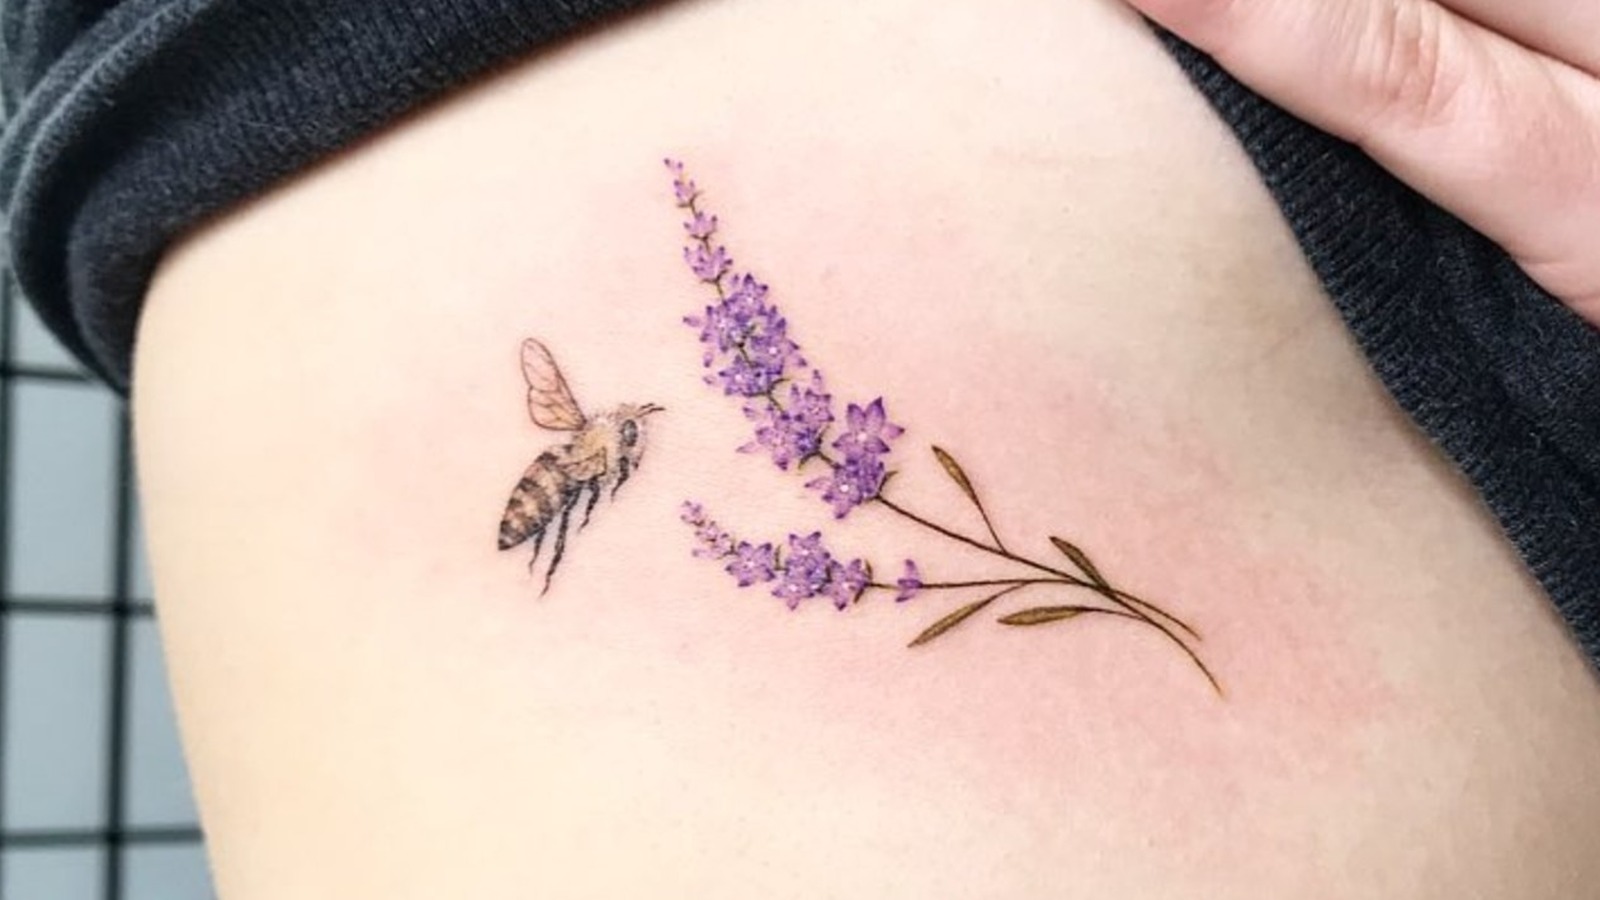 Lavender flower tattoo meaning